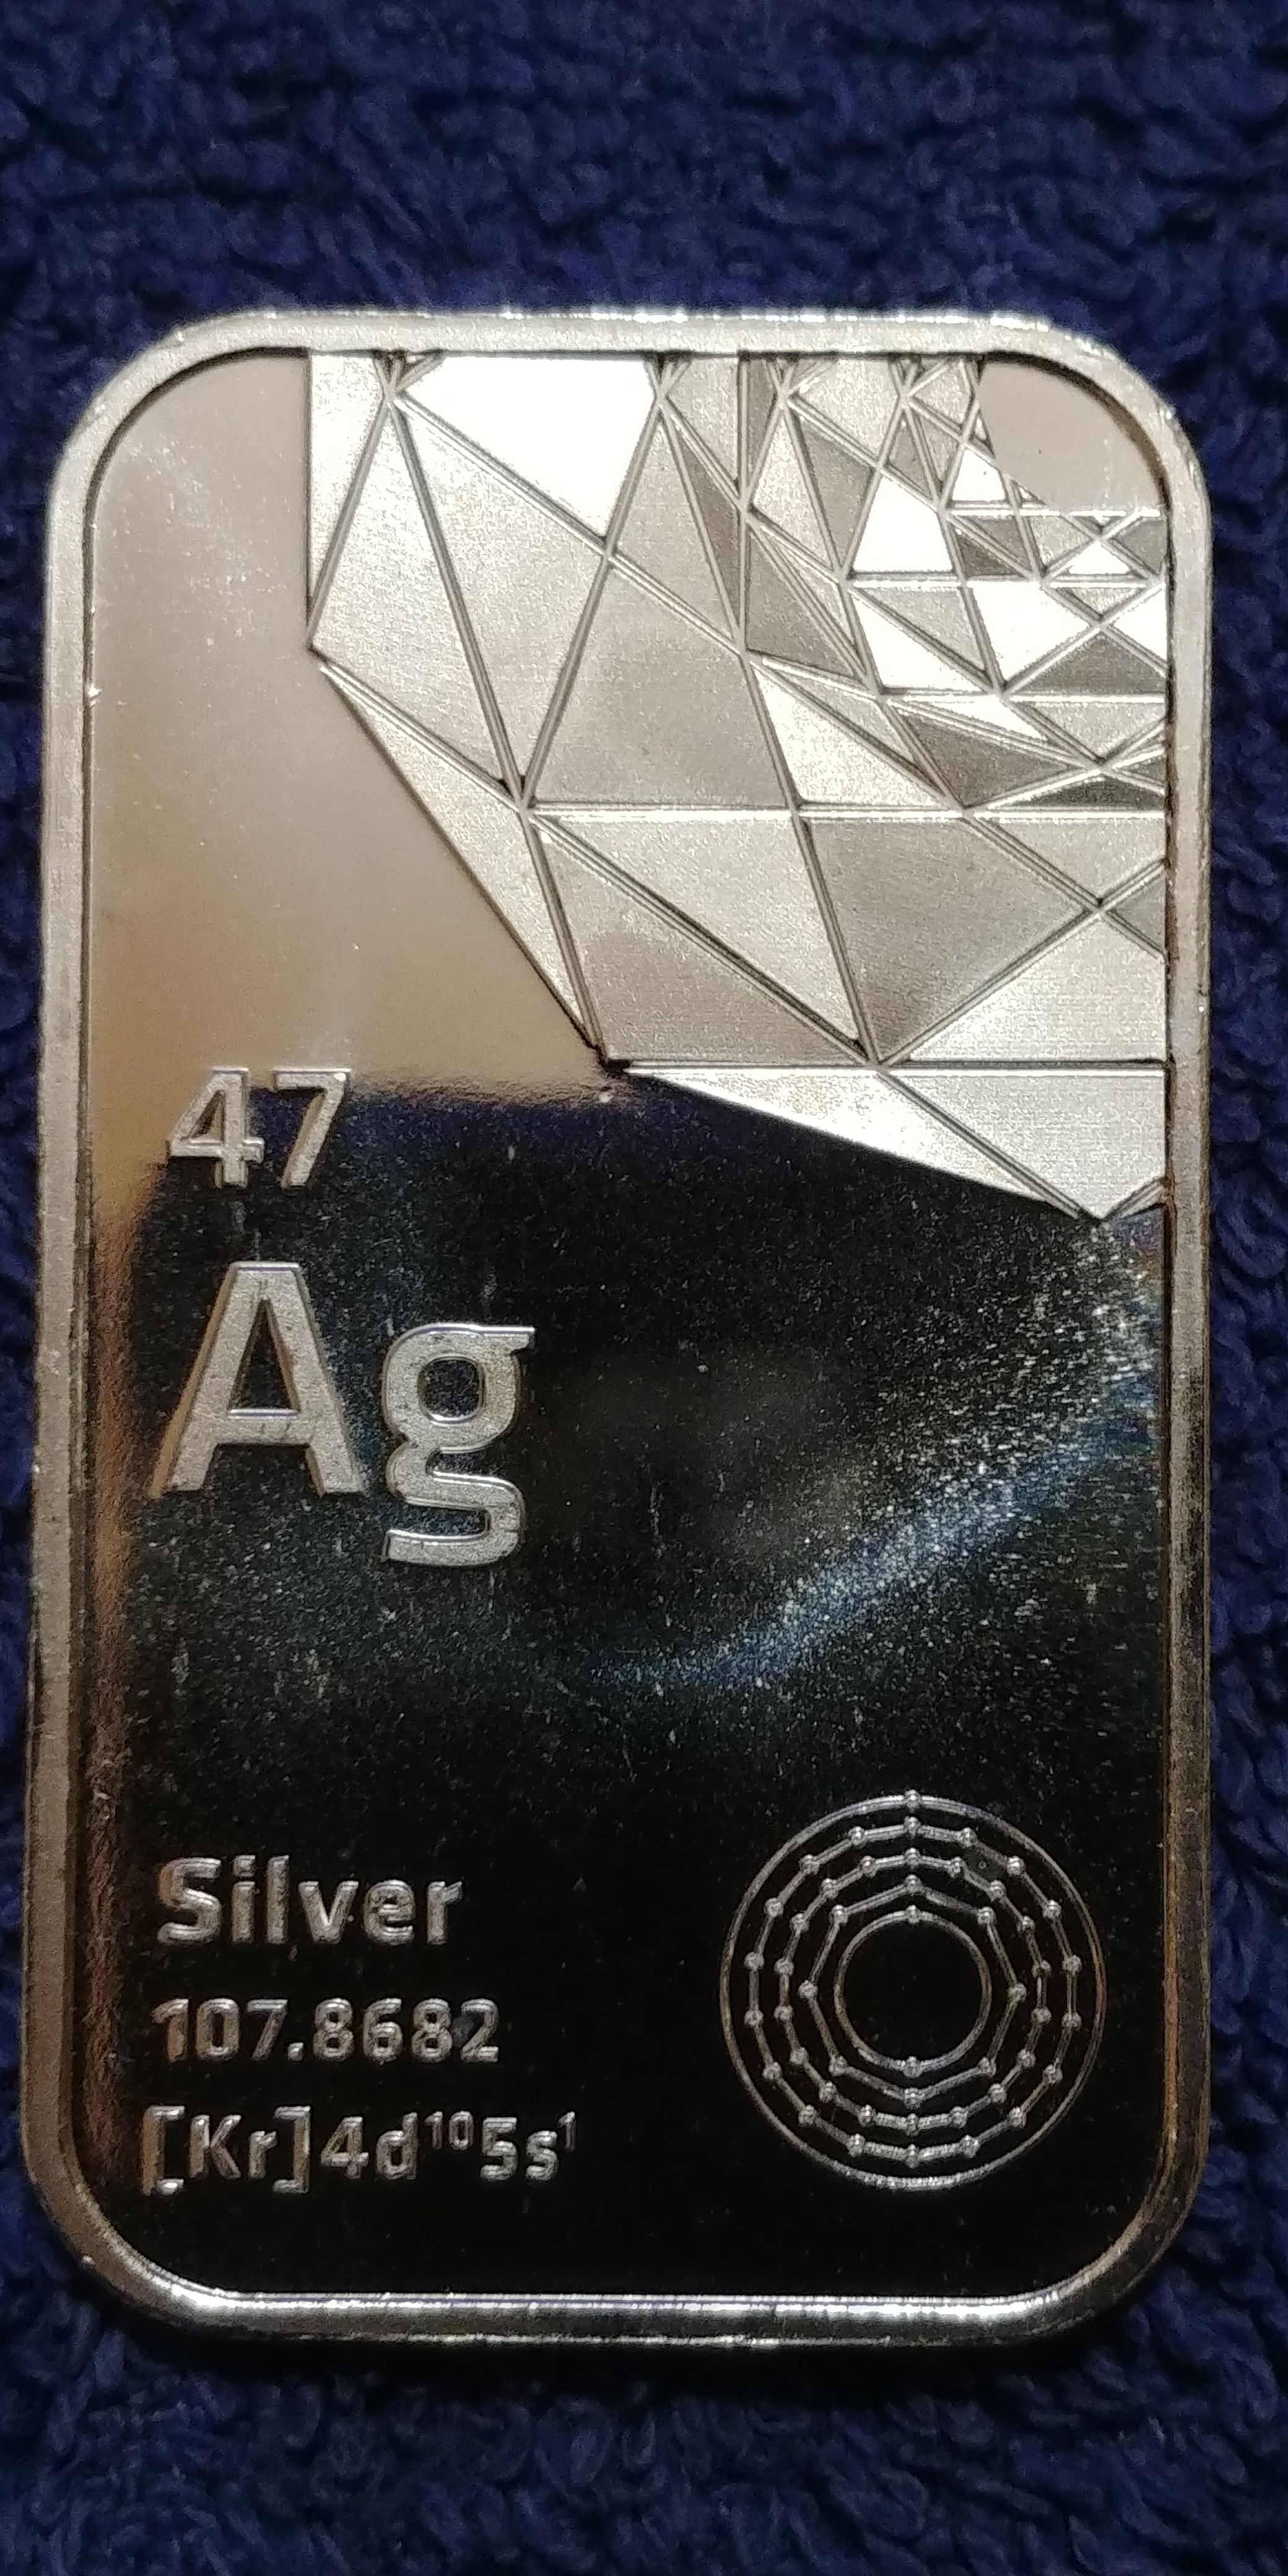 Order of Silver from Provident Metals......I Had not Ordered Anything